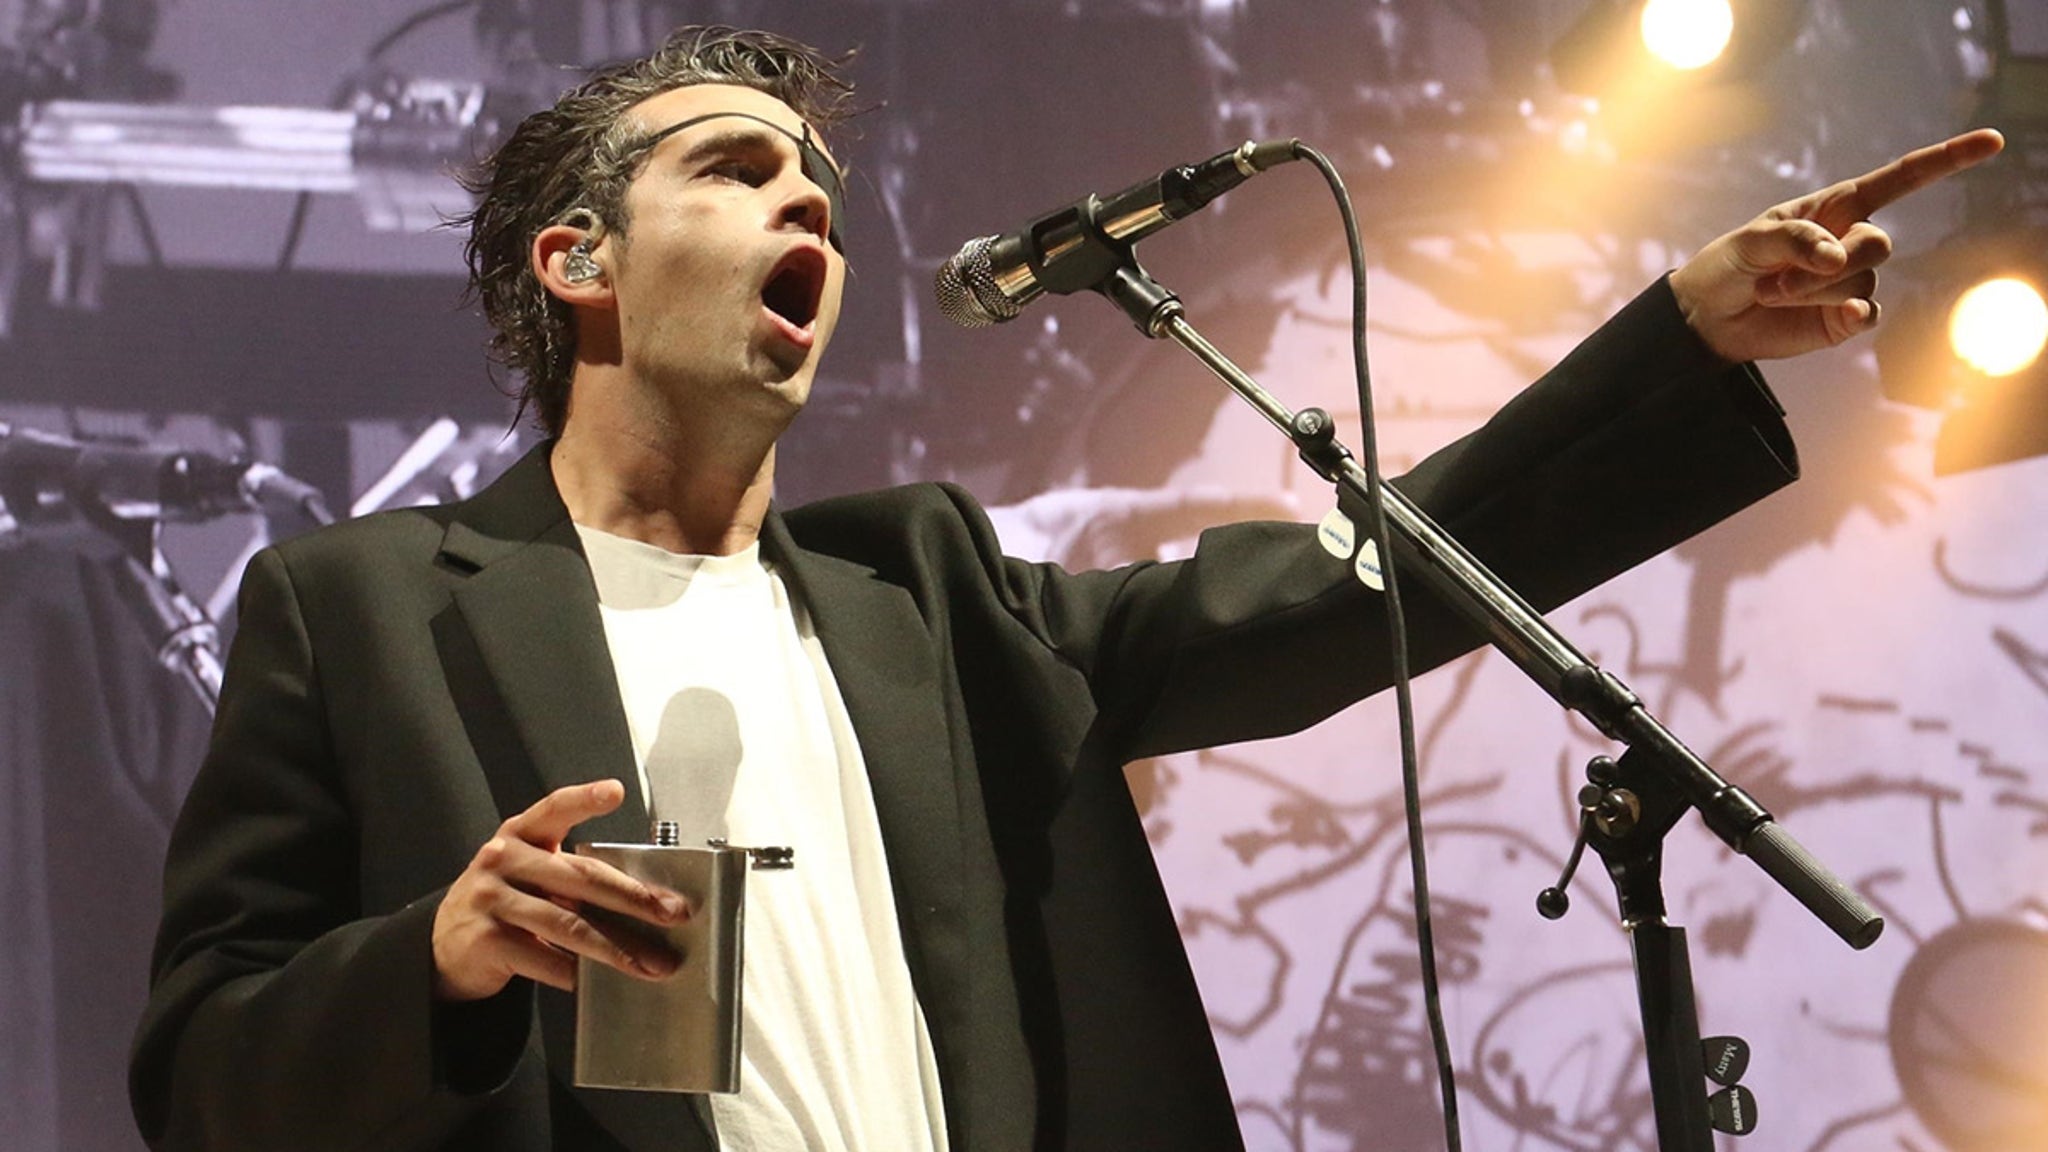 Matty Healy drank from a flask on stage after breaking up with Taylor Swift